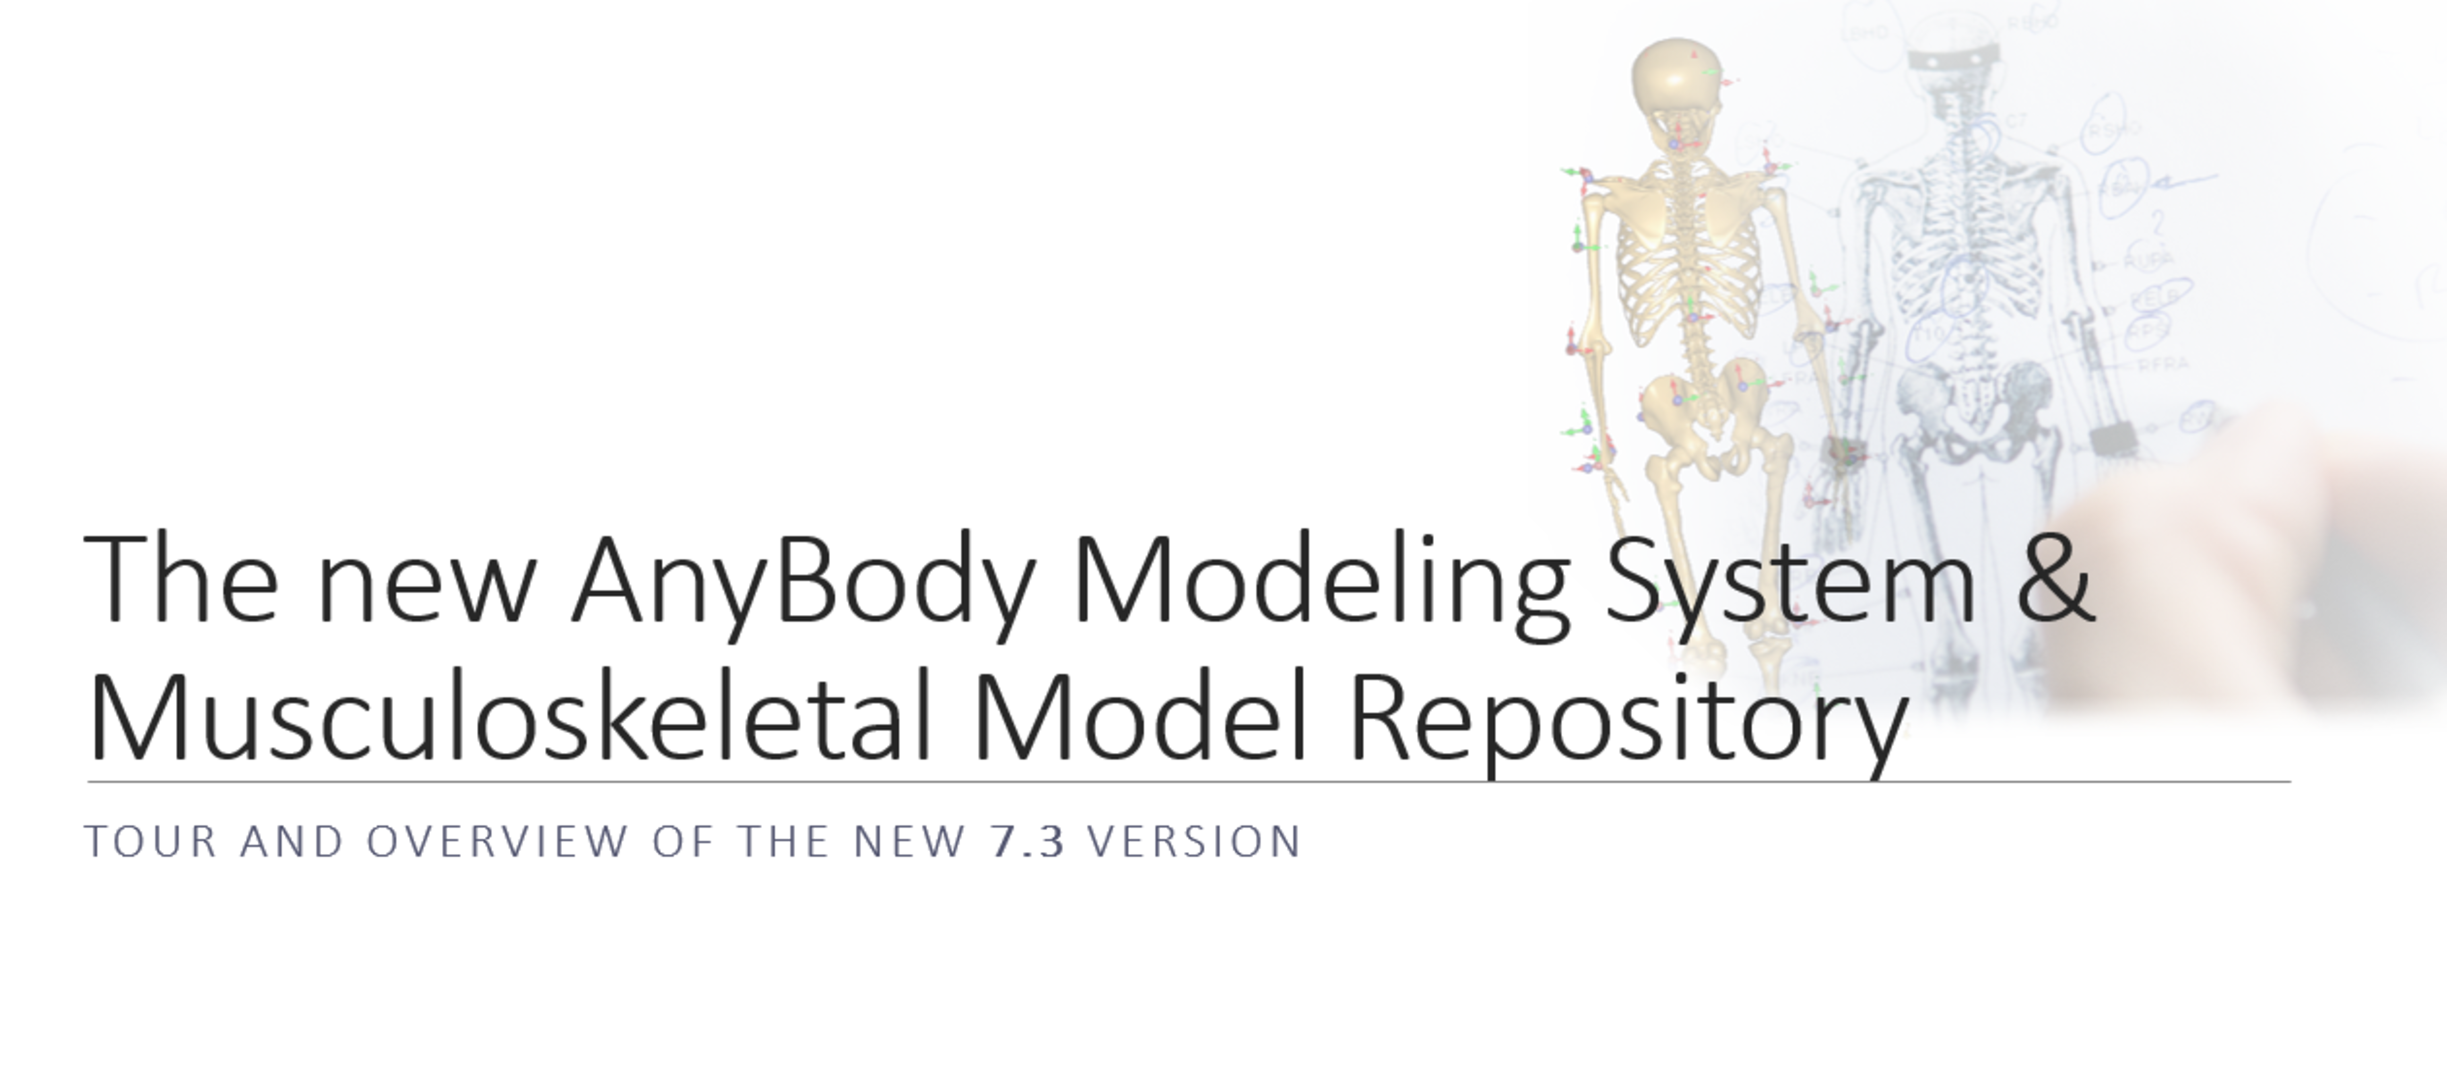 New features in the AnyBody Modeling System Version 7.3